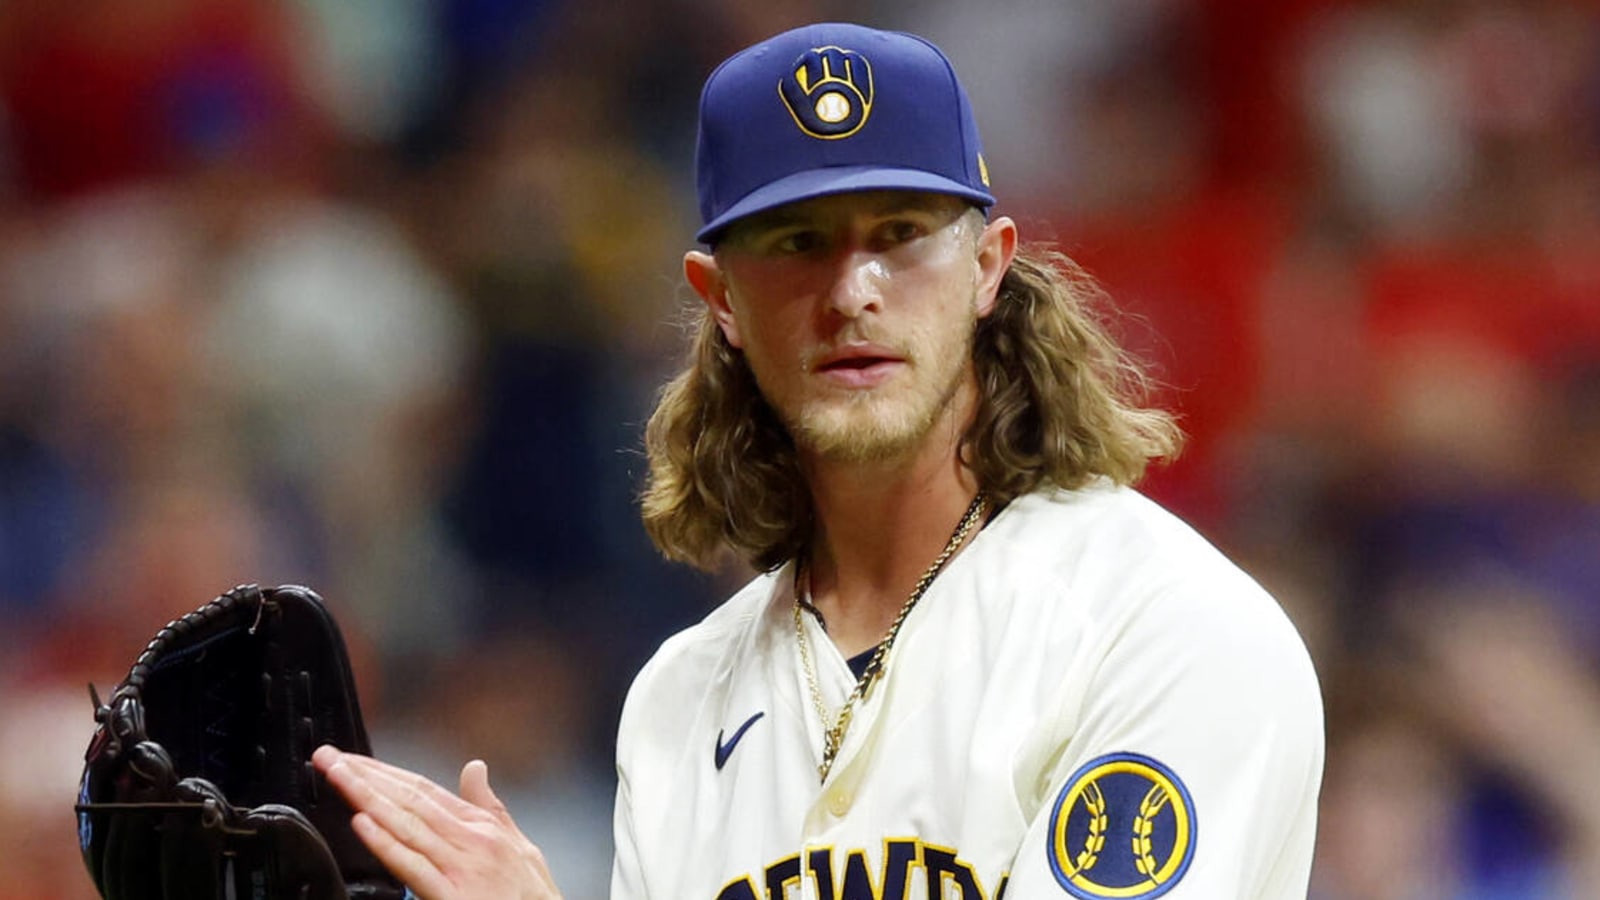 Brewers activate reliever Josh Hader, place Aaron Ashby on 15-day IL